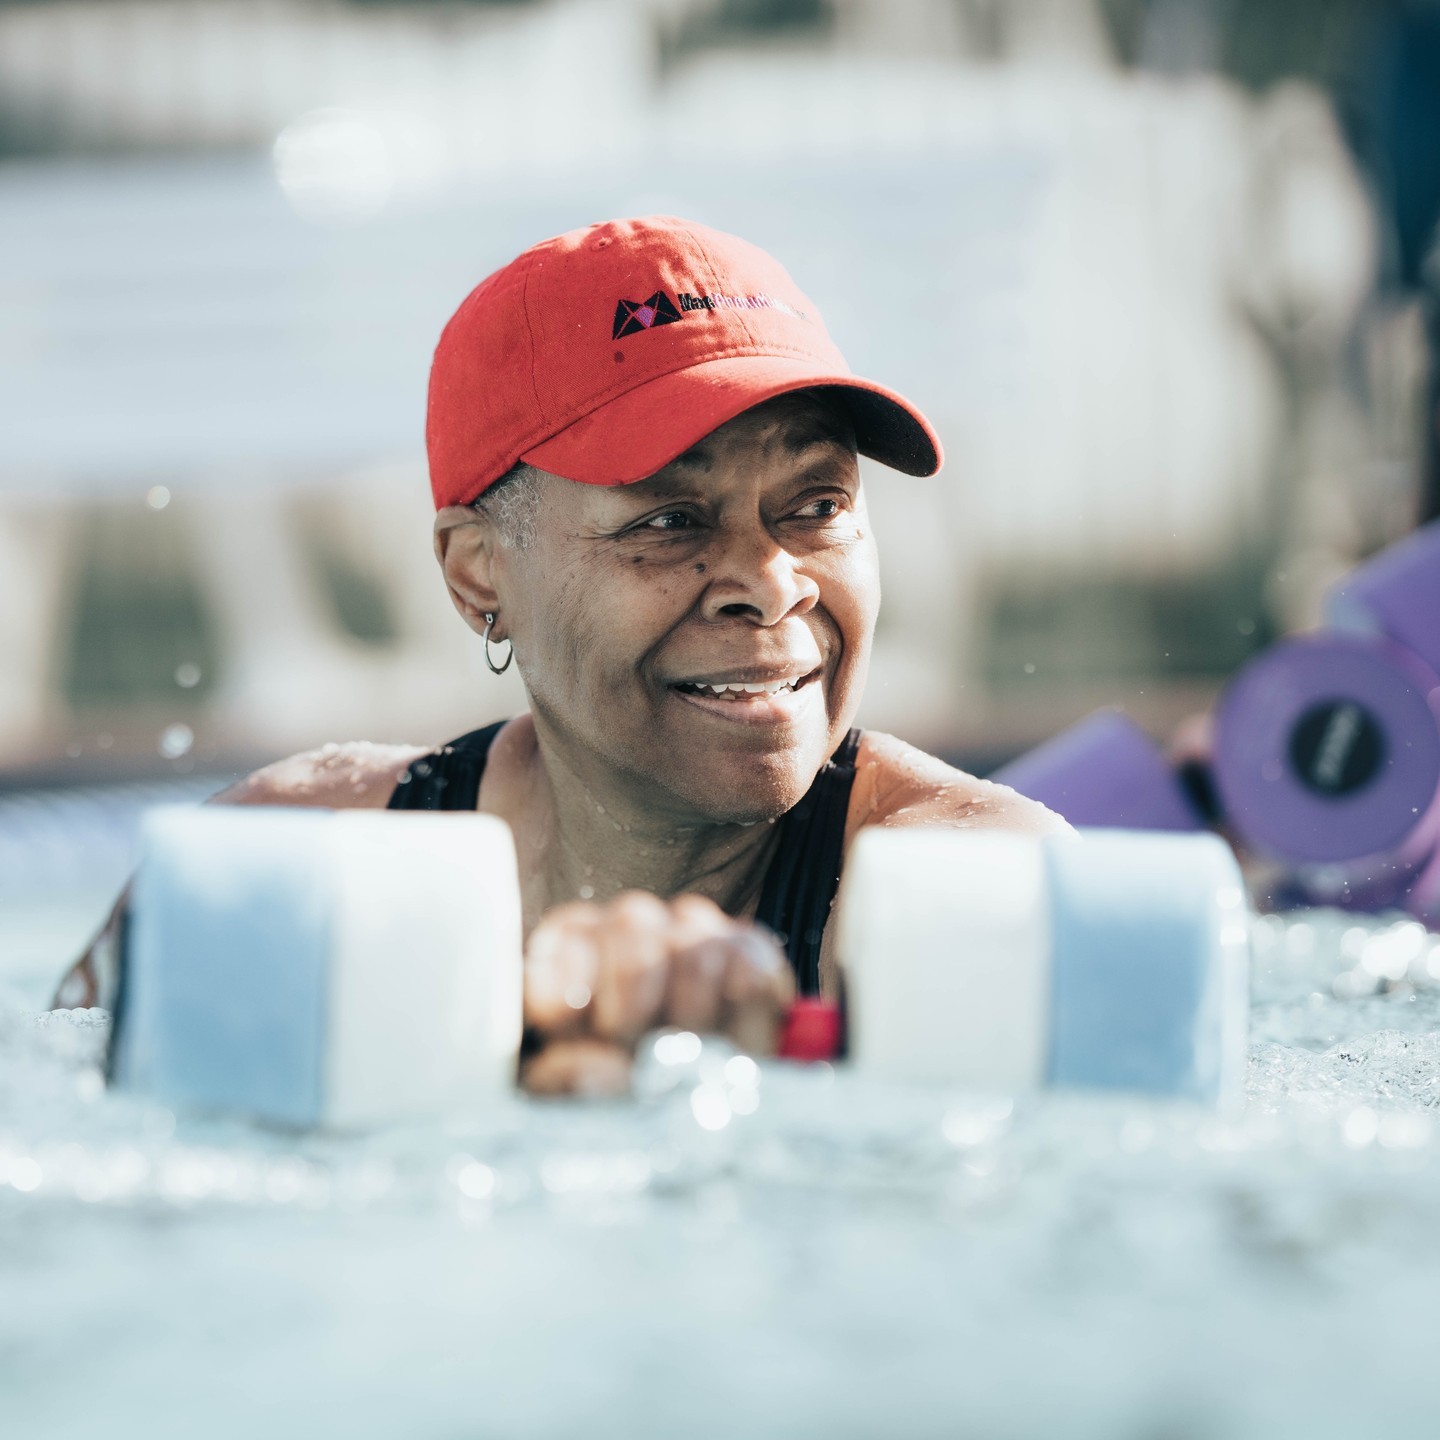 At Y, you’ll find more than just a place to work out. With opportunities to connect with neighbors and give back to your community, you’ll discover a greater sense of purpose, too. 🌟

Find your Y and join today using the link in our story 🔗  #ForABetterUs #KeepAustinFit #Austintx #YMCA